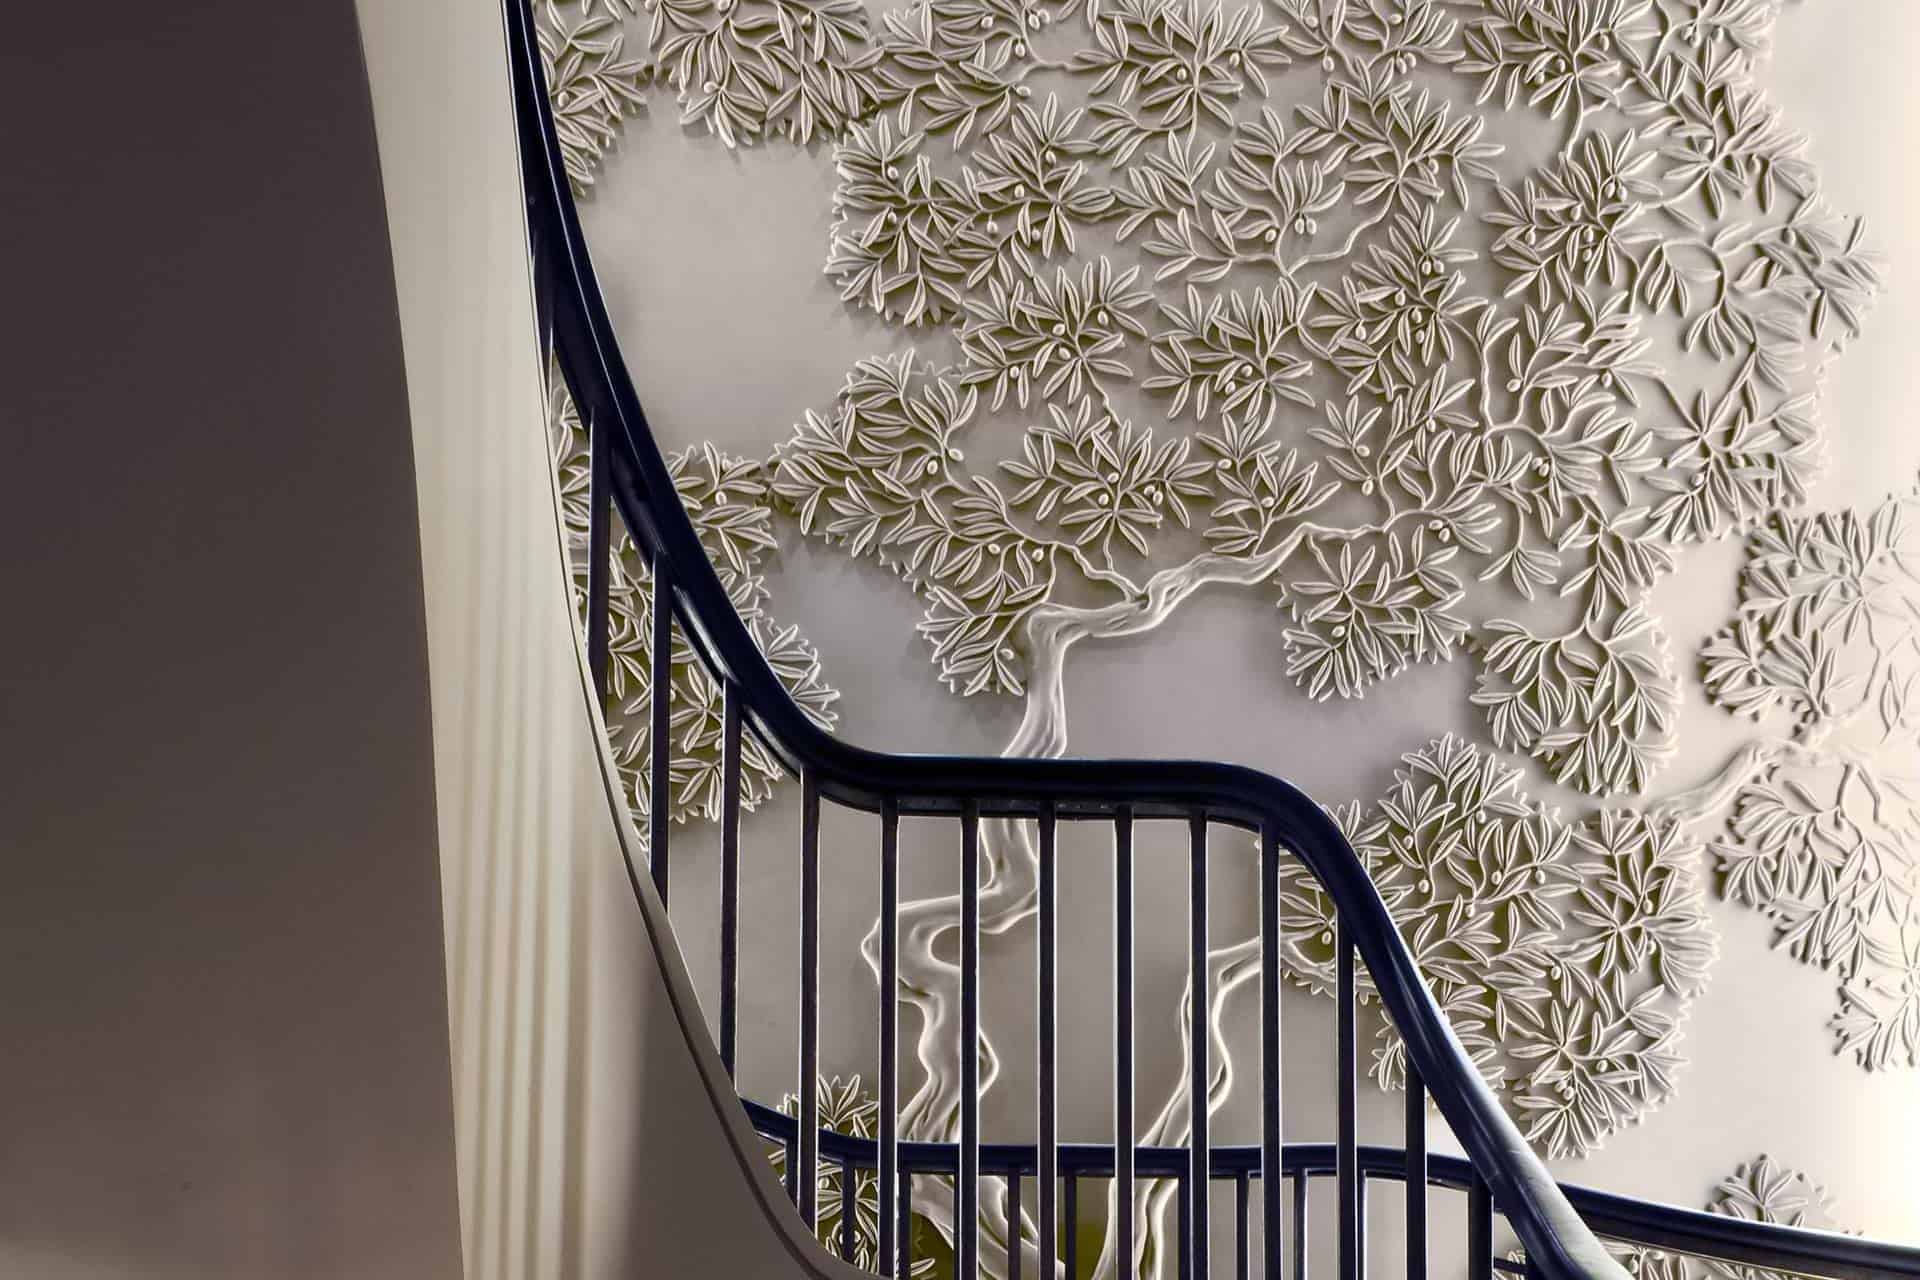 Olive tree design bas-relief, staircase, private apartment, London. Photo by James Silverman.